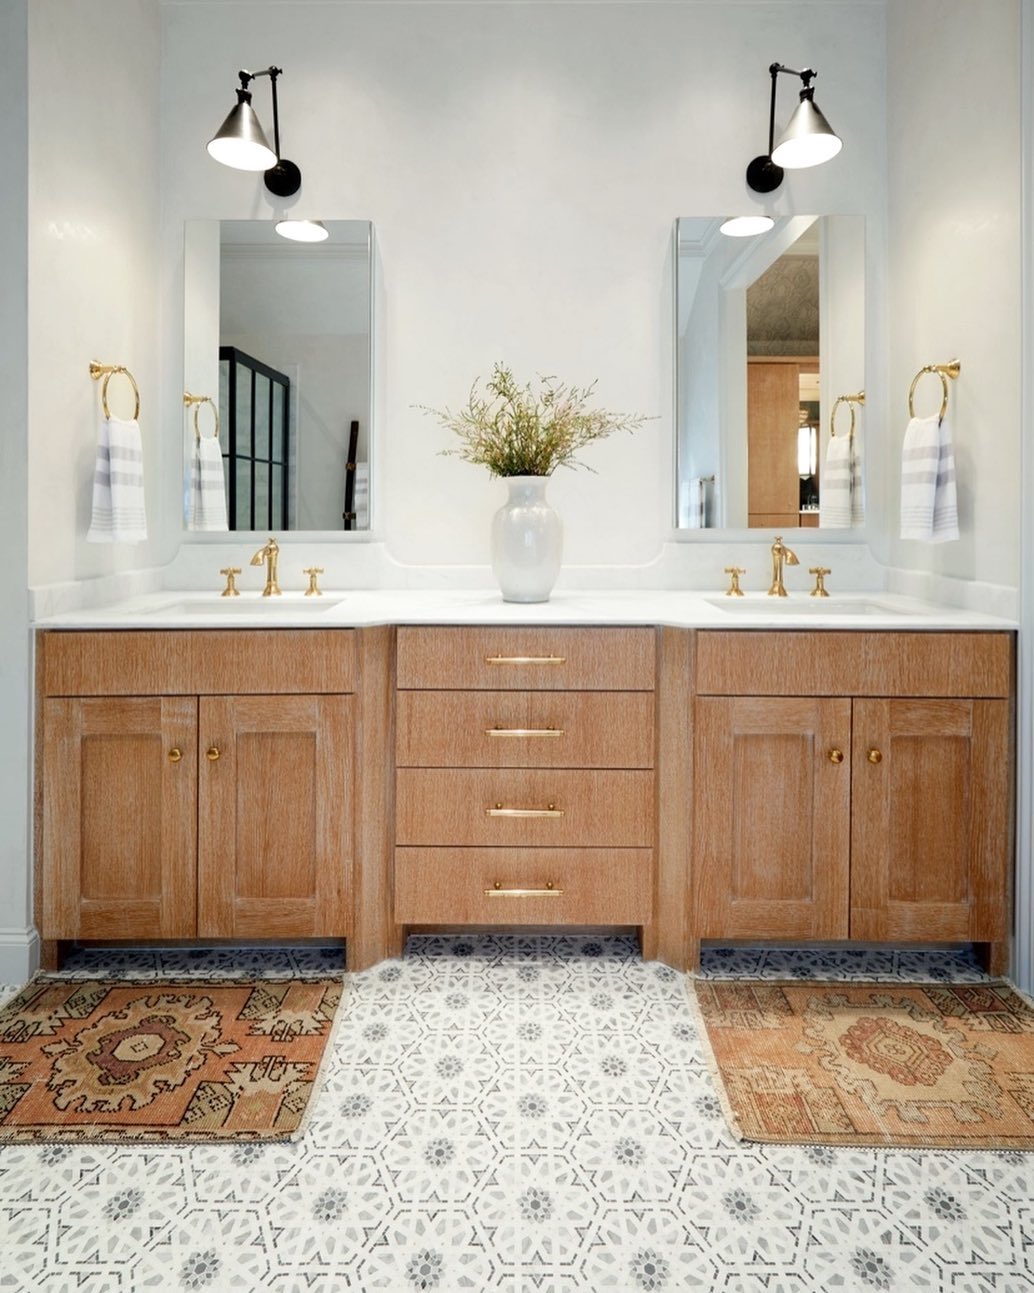 19 Bathroom Counter Decorating Ideas to Makeover your Bathroom